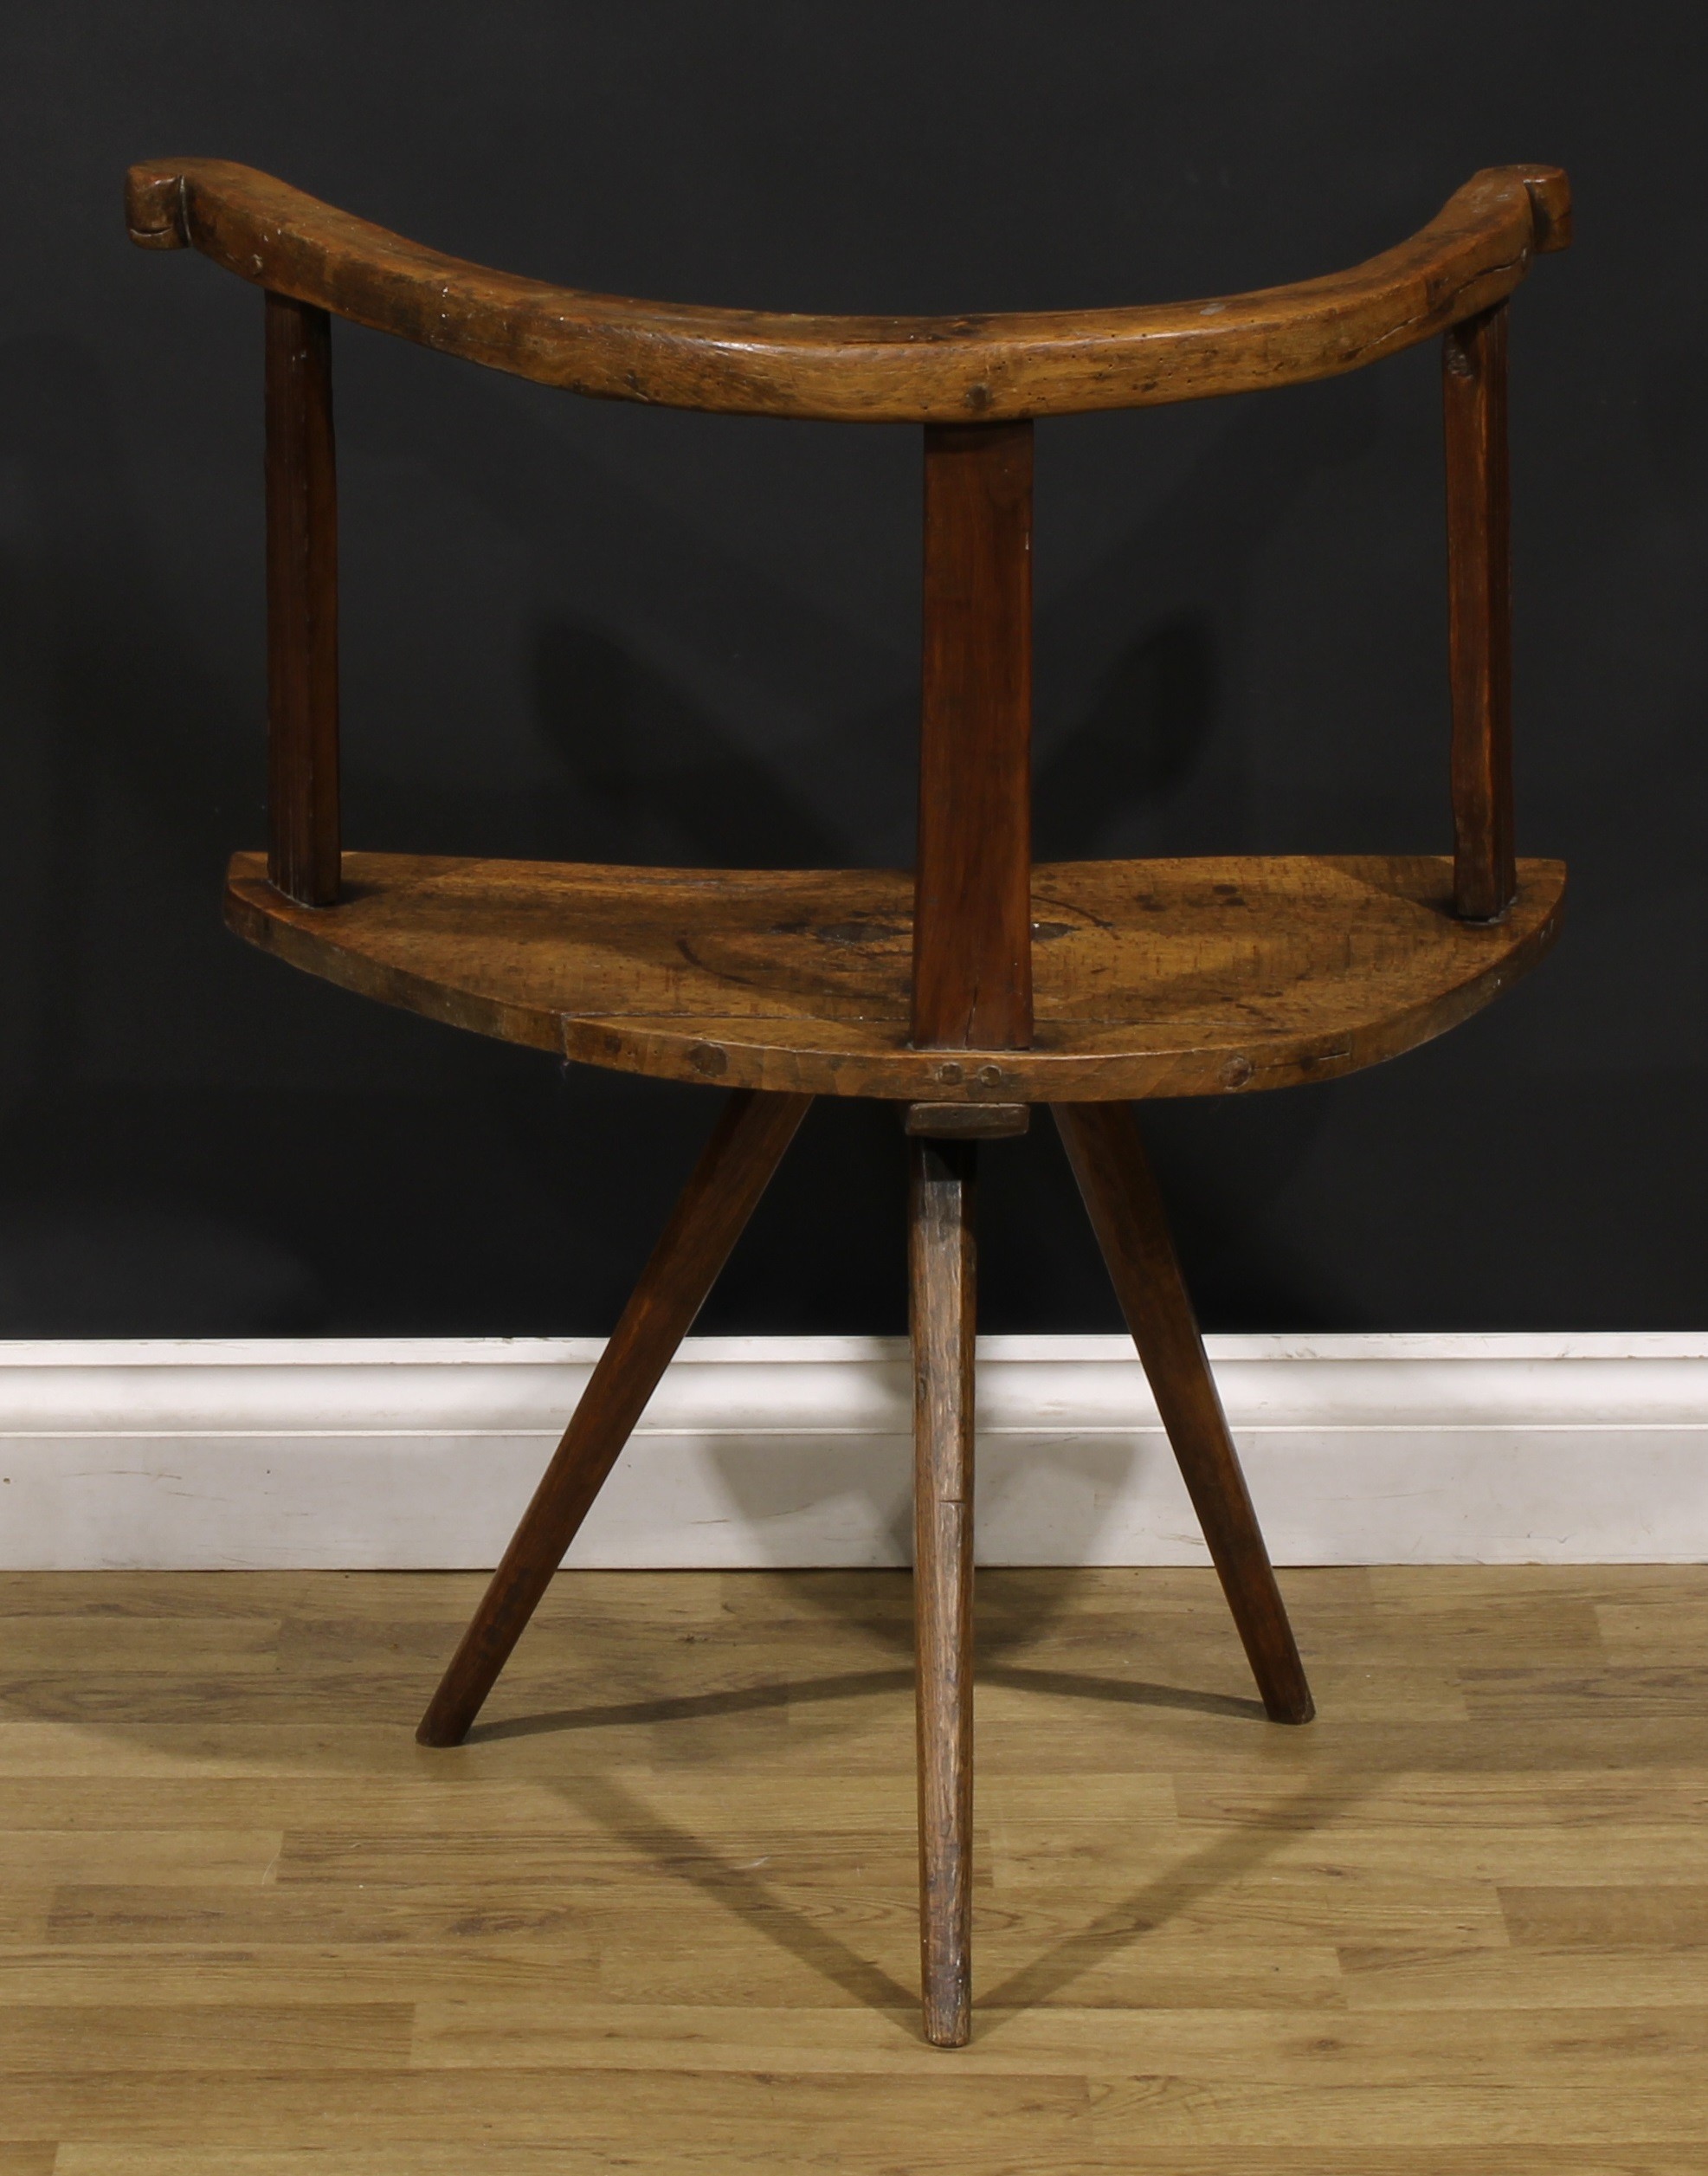 A 19th century primitive and vernacular indigenous timber cricket-form hedge or famine chair, - Bild 4 aus 4